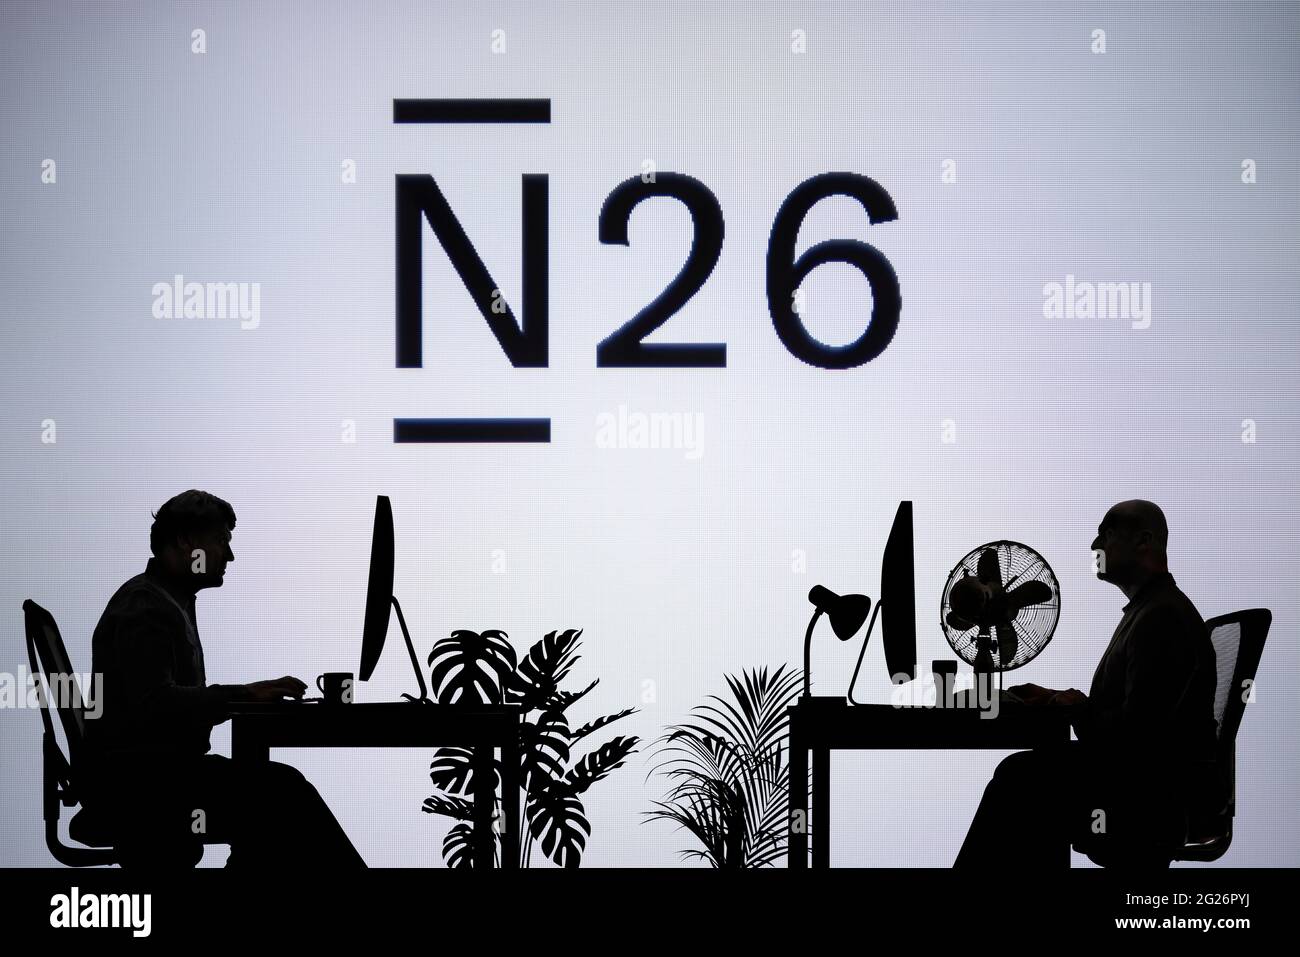 The N26 Bank logo is seen on an LED screen in the background while two silhouetted people work in an office environment (Editorial use only) Stock Photo